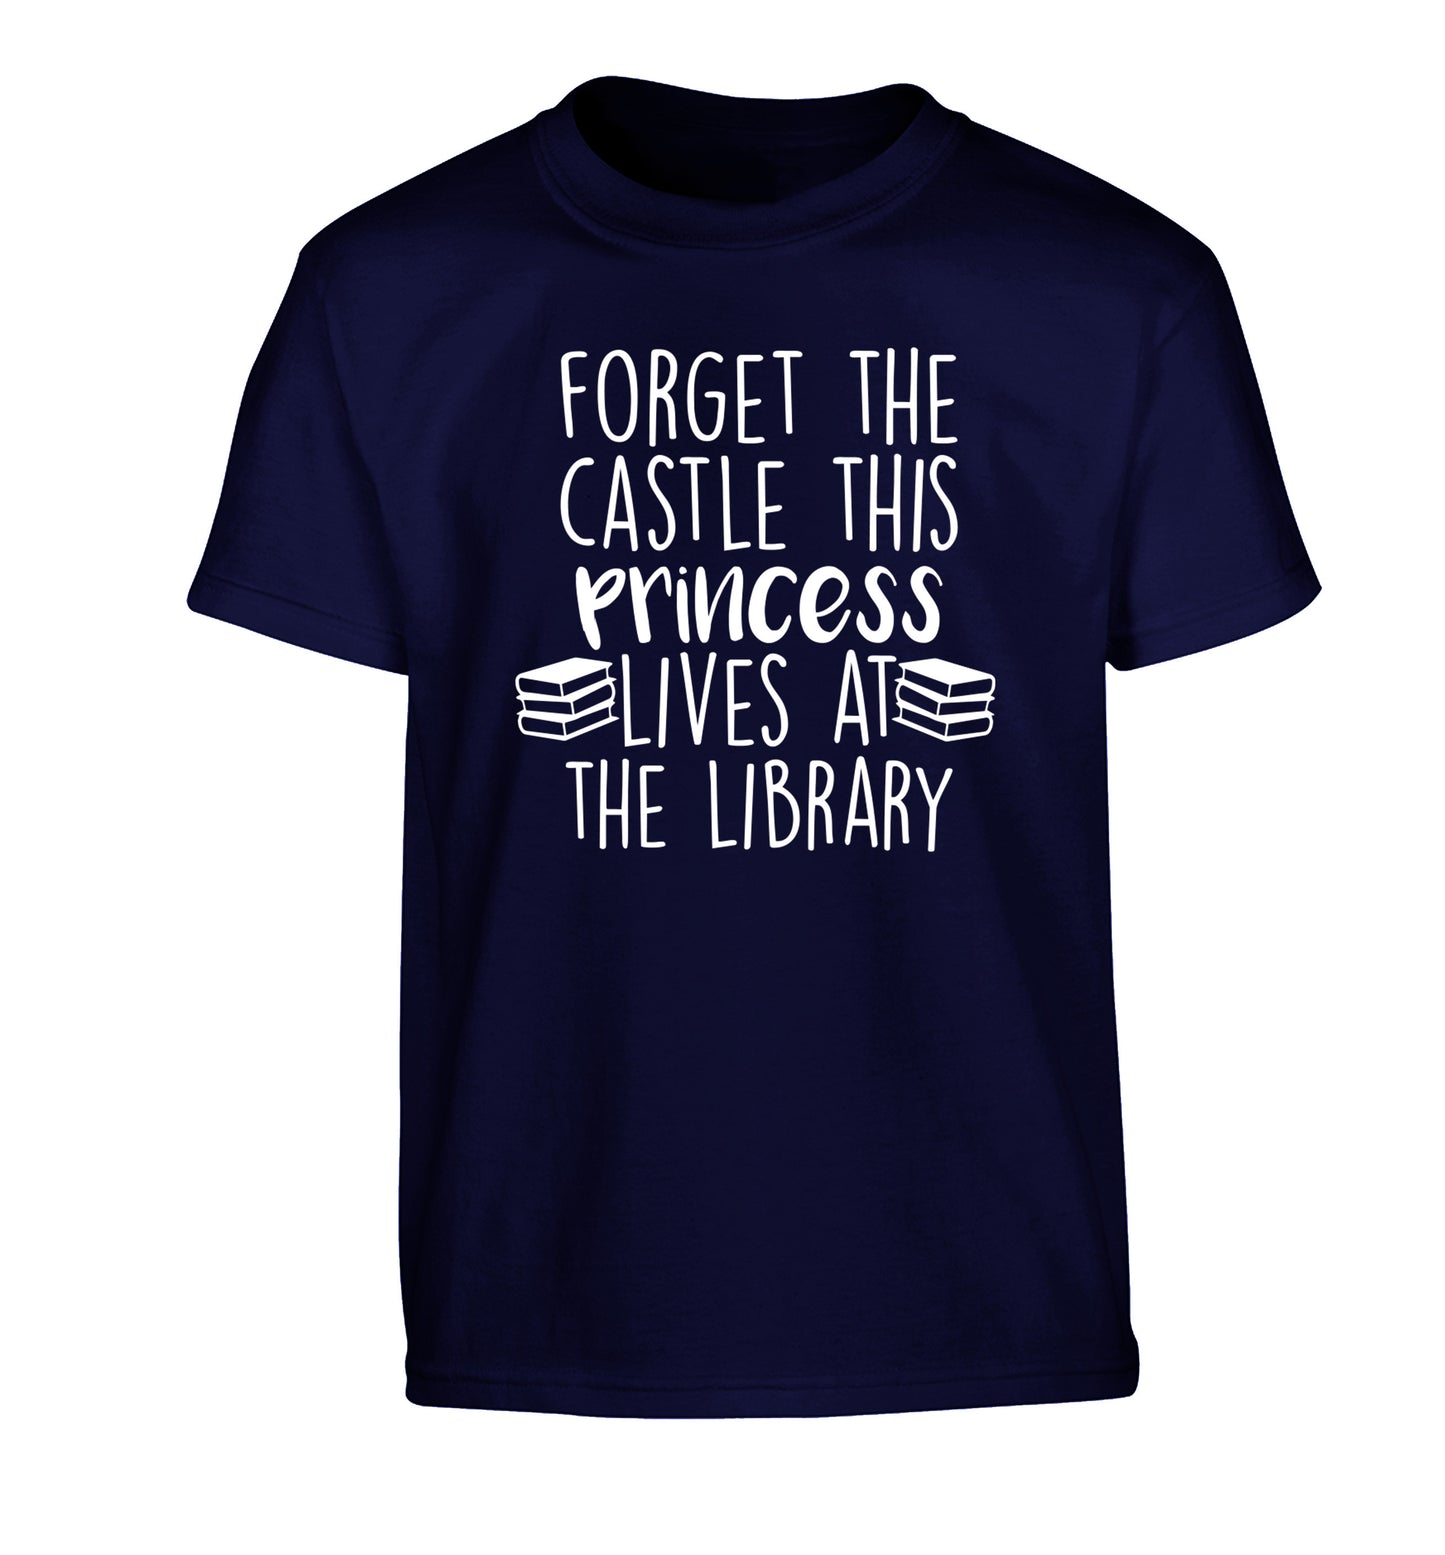 Forget the castle this princess lives at the library Children's navy Tshirt 12-14 Years